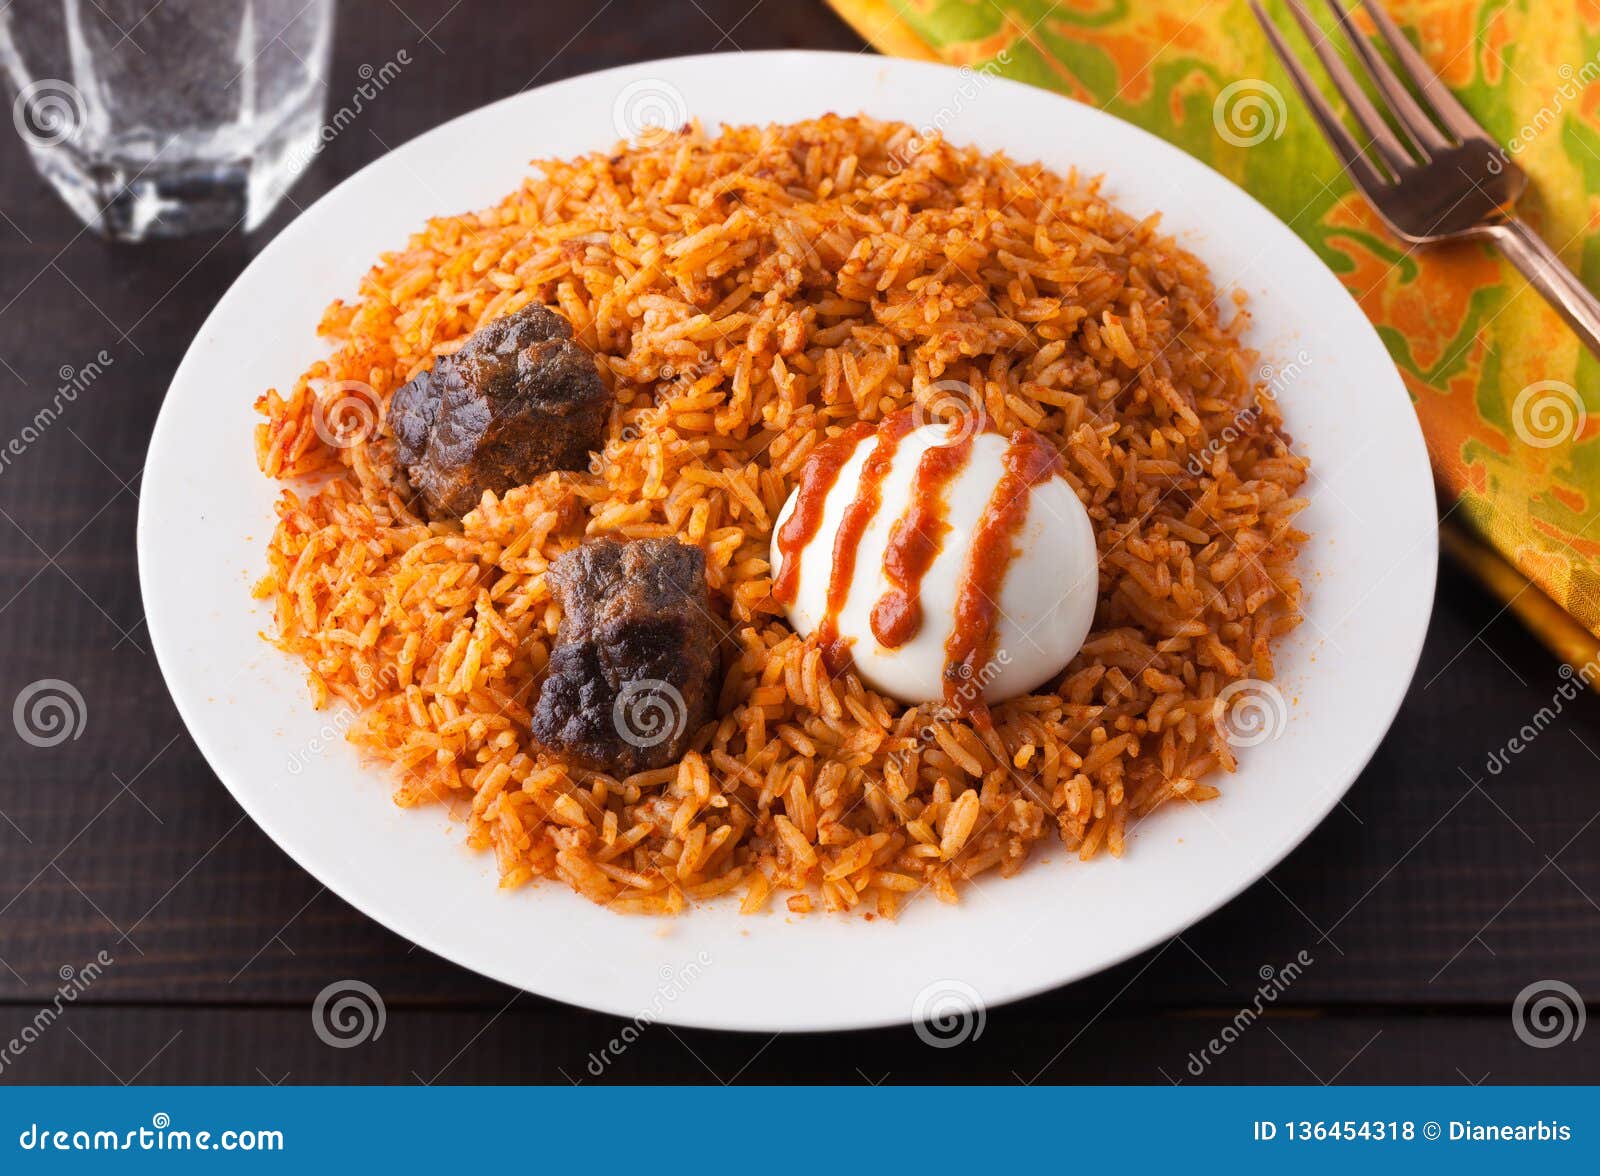 West Africa Rice Jollof With Beef And Boiled Egg Stock ...